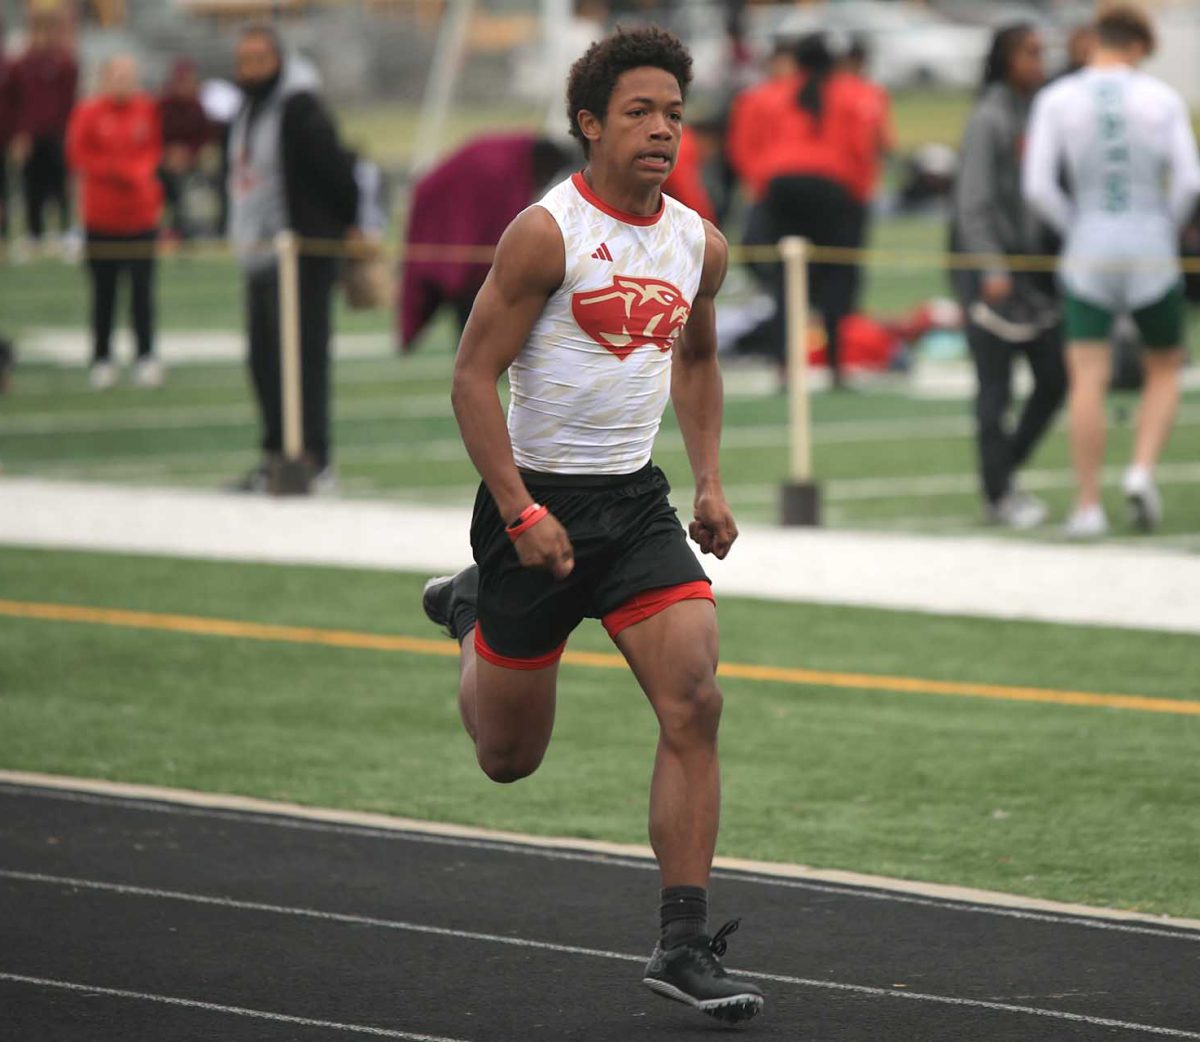 ALMOST THERE. Sophomore Jahamante Haden Kuhn sprints down the track during a meet on Thursday, Feb. 29, 2024. “The relay race went pretty good, our time dropped by about a second. I was scared going into it,” Kuhn said. “I ended up catching some people so it went pretty well.”
